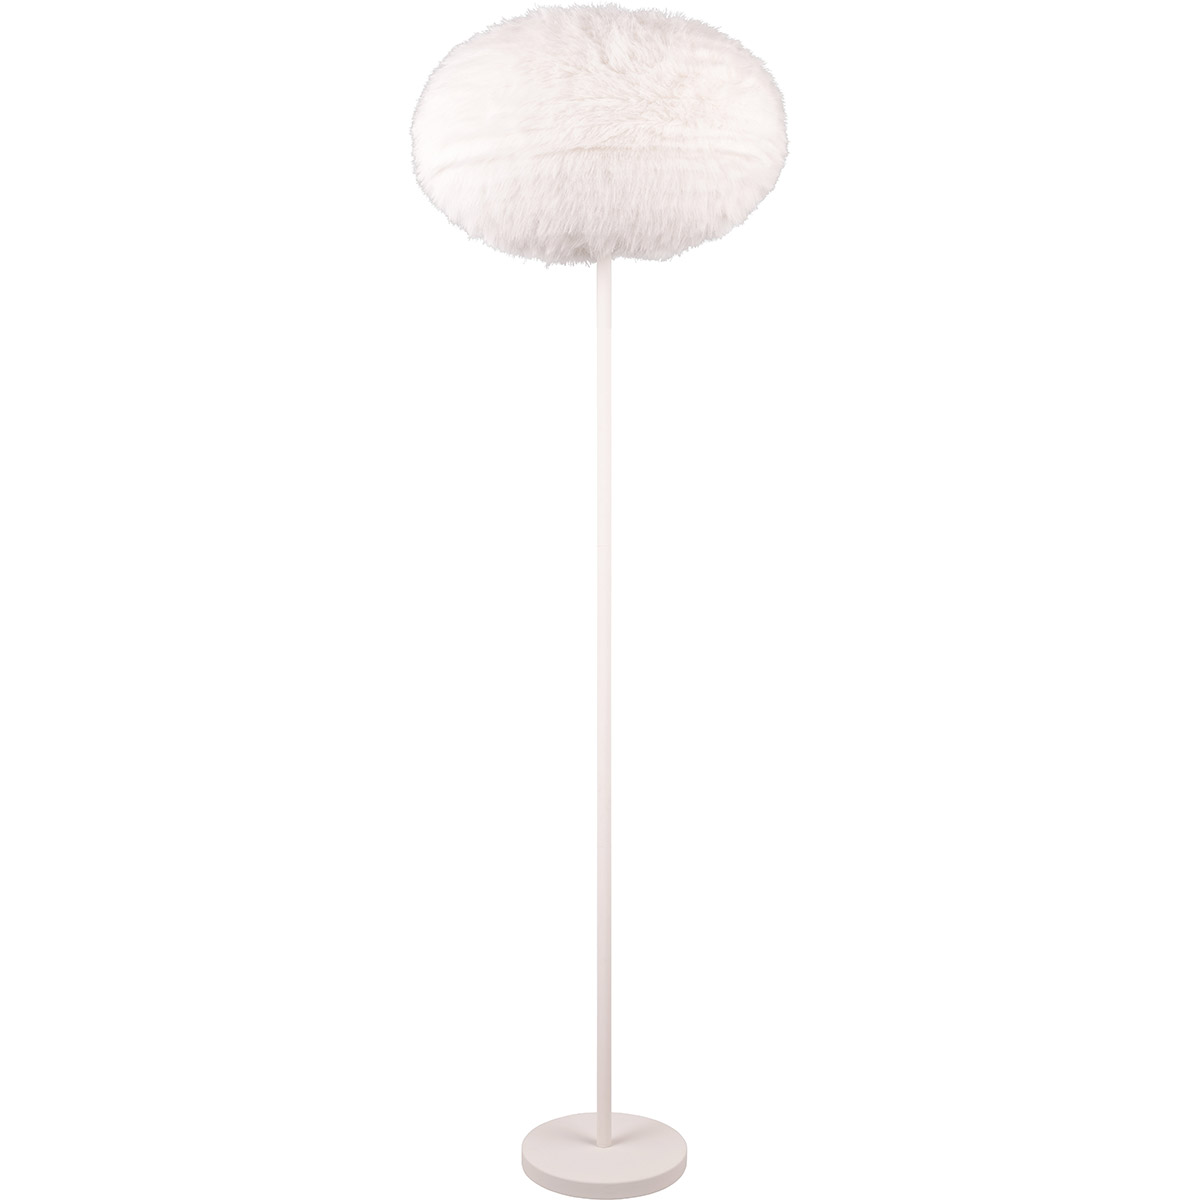 BES LED LED Vloerlamp - Trion Fluffy - E27 Fitting - Rond - Taupe - Synthetisch Pluche